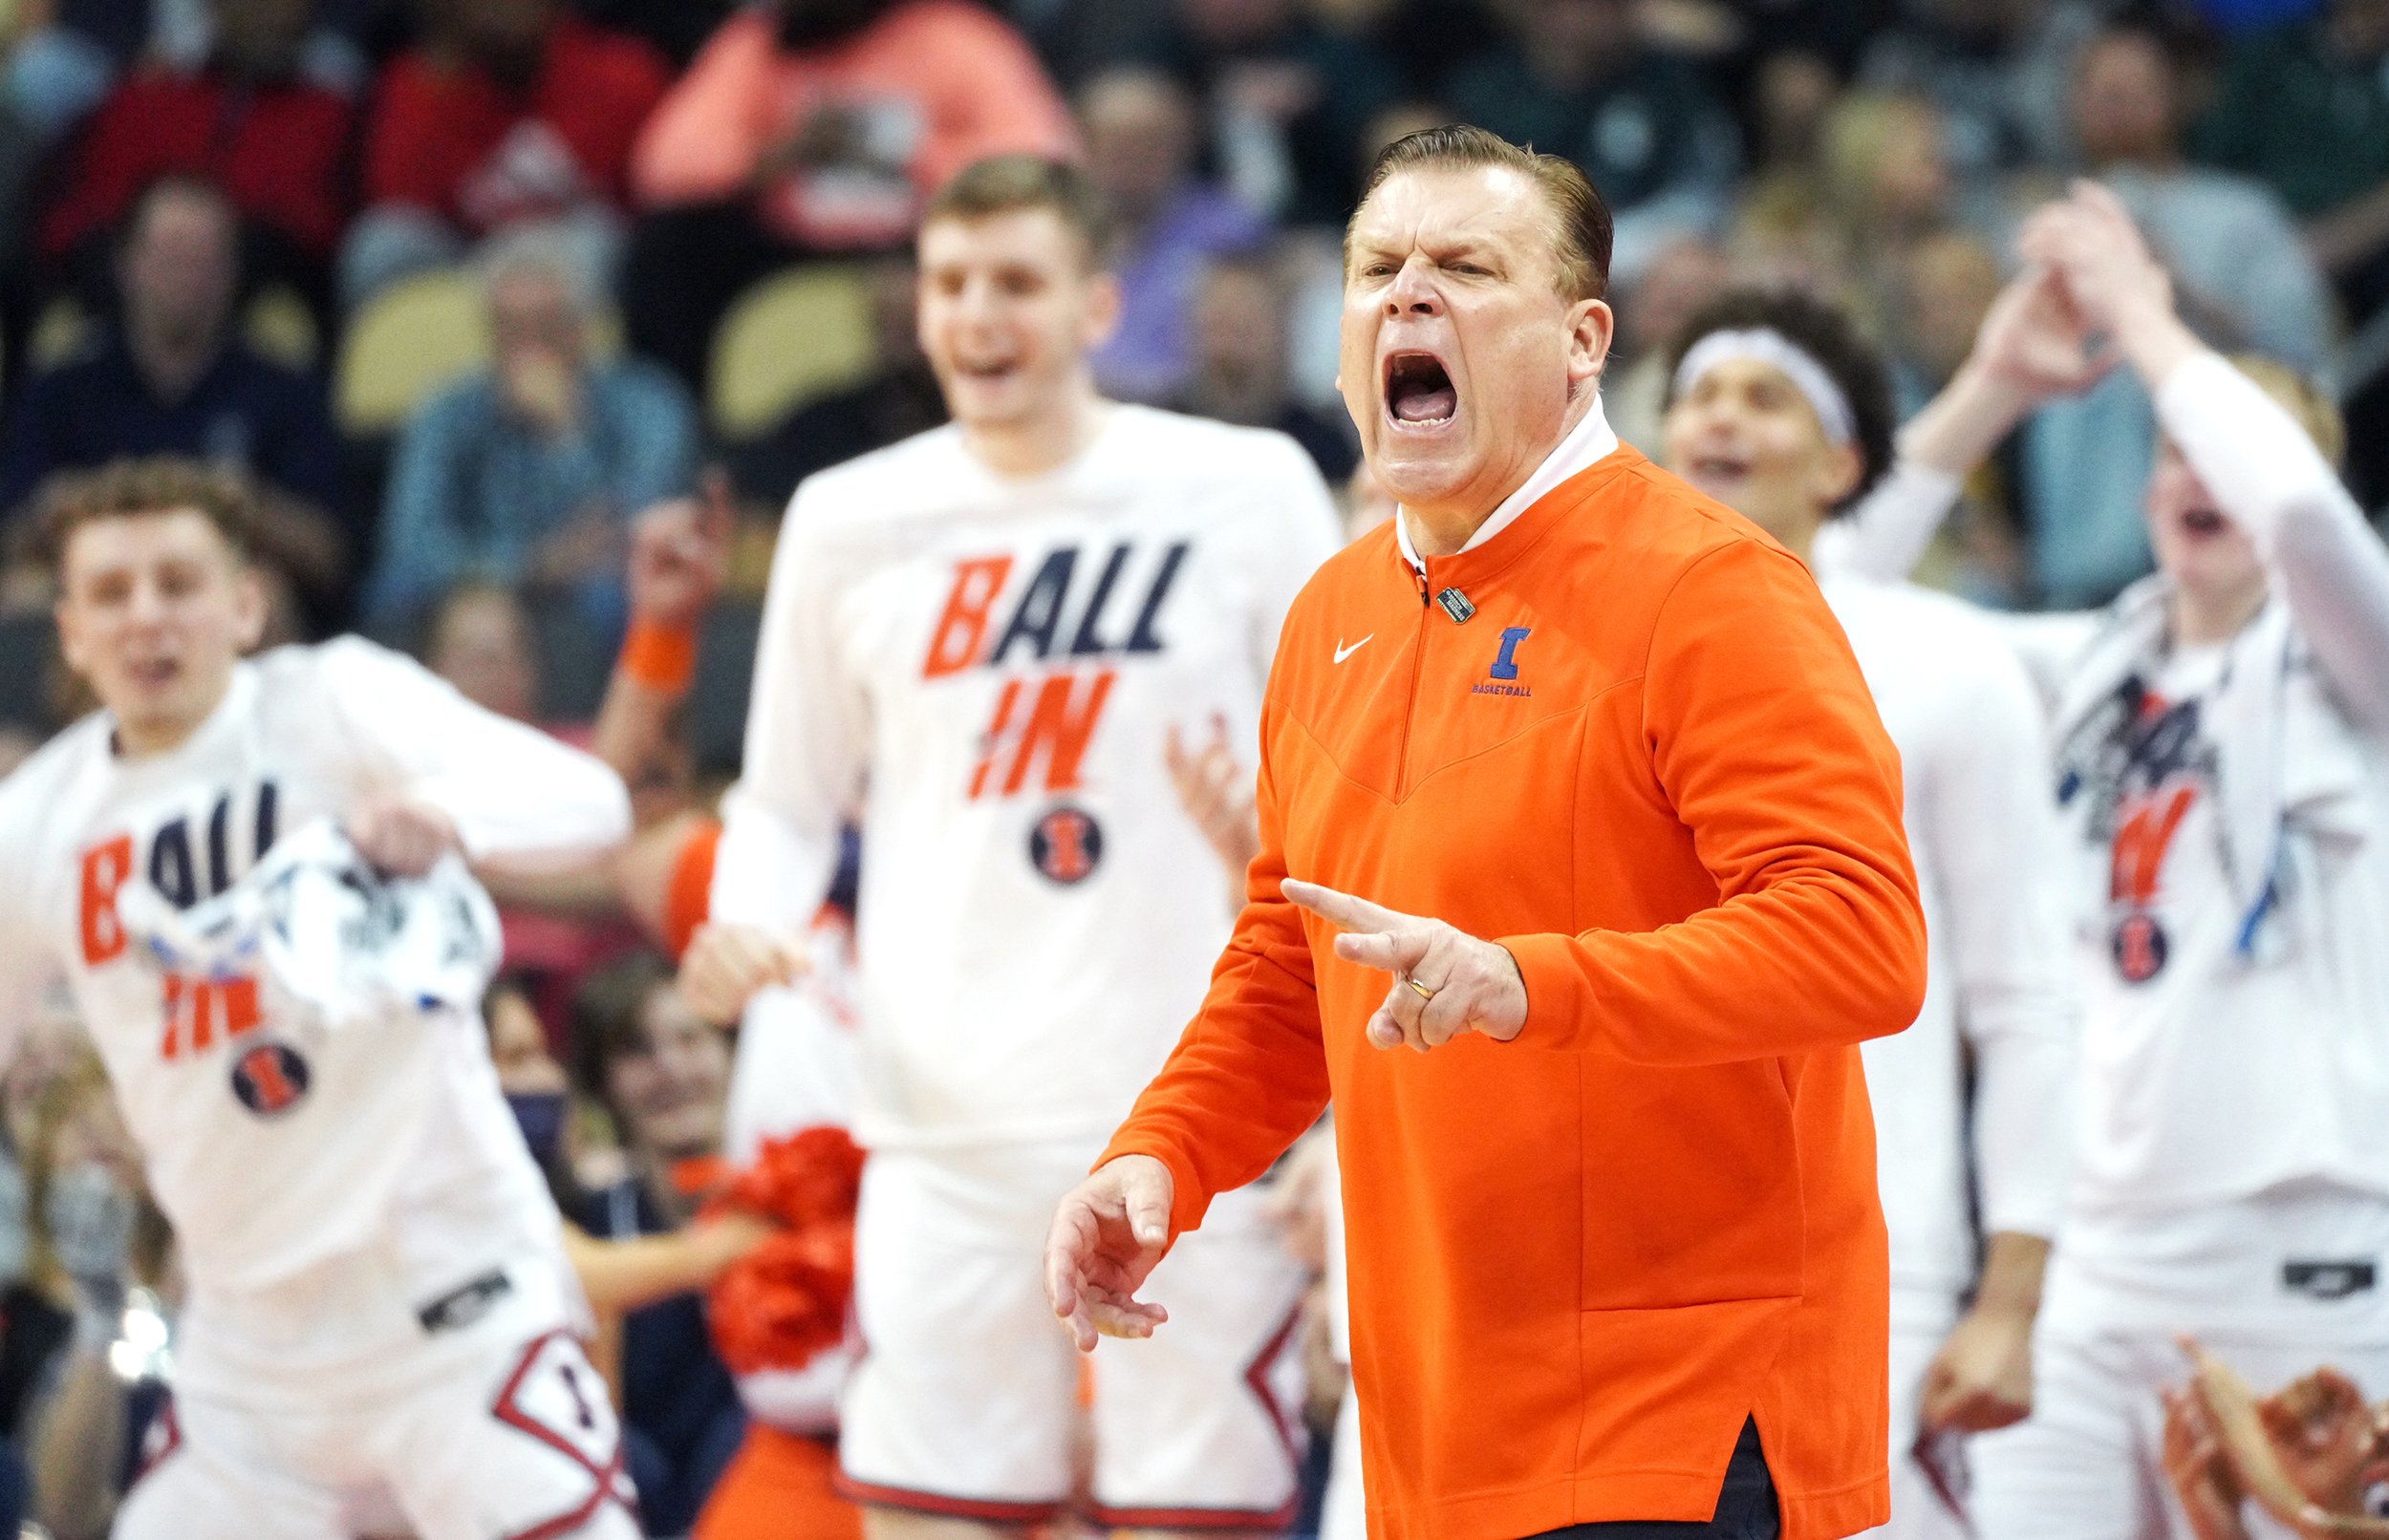  Illinois coach Brad Underwood shouts to his team as they play Chattanooga during the first round of the 2022 NCAA Men's Basketball Tournament on Friday, March 18, 2022, at Pittsburgh’s PPG Paints Arena. (Emily Matthews/Post-Gazette)  